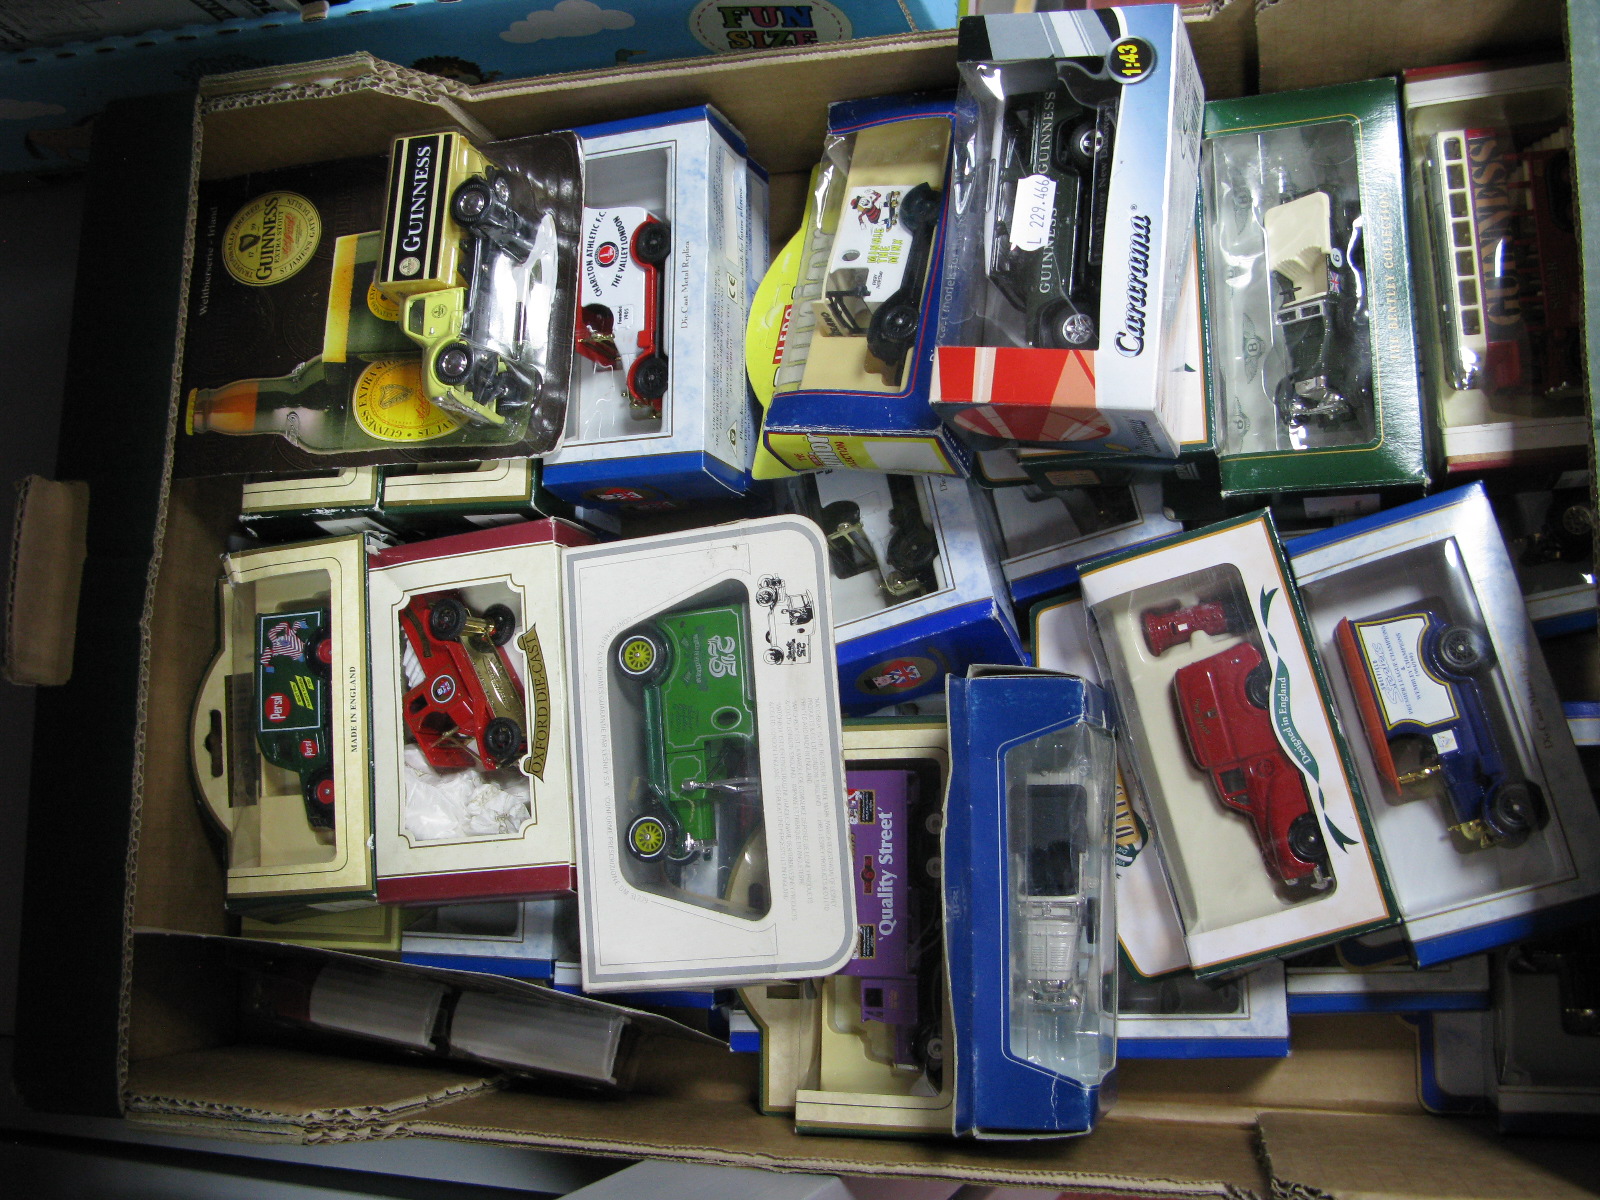 In Excess of Thirty Diecast Model Vehicles by, Lledo 'Days Gone', Oxford Diecast, Matchbox 'Models